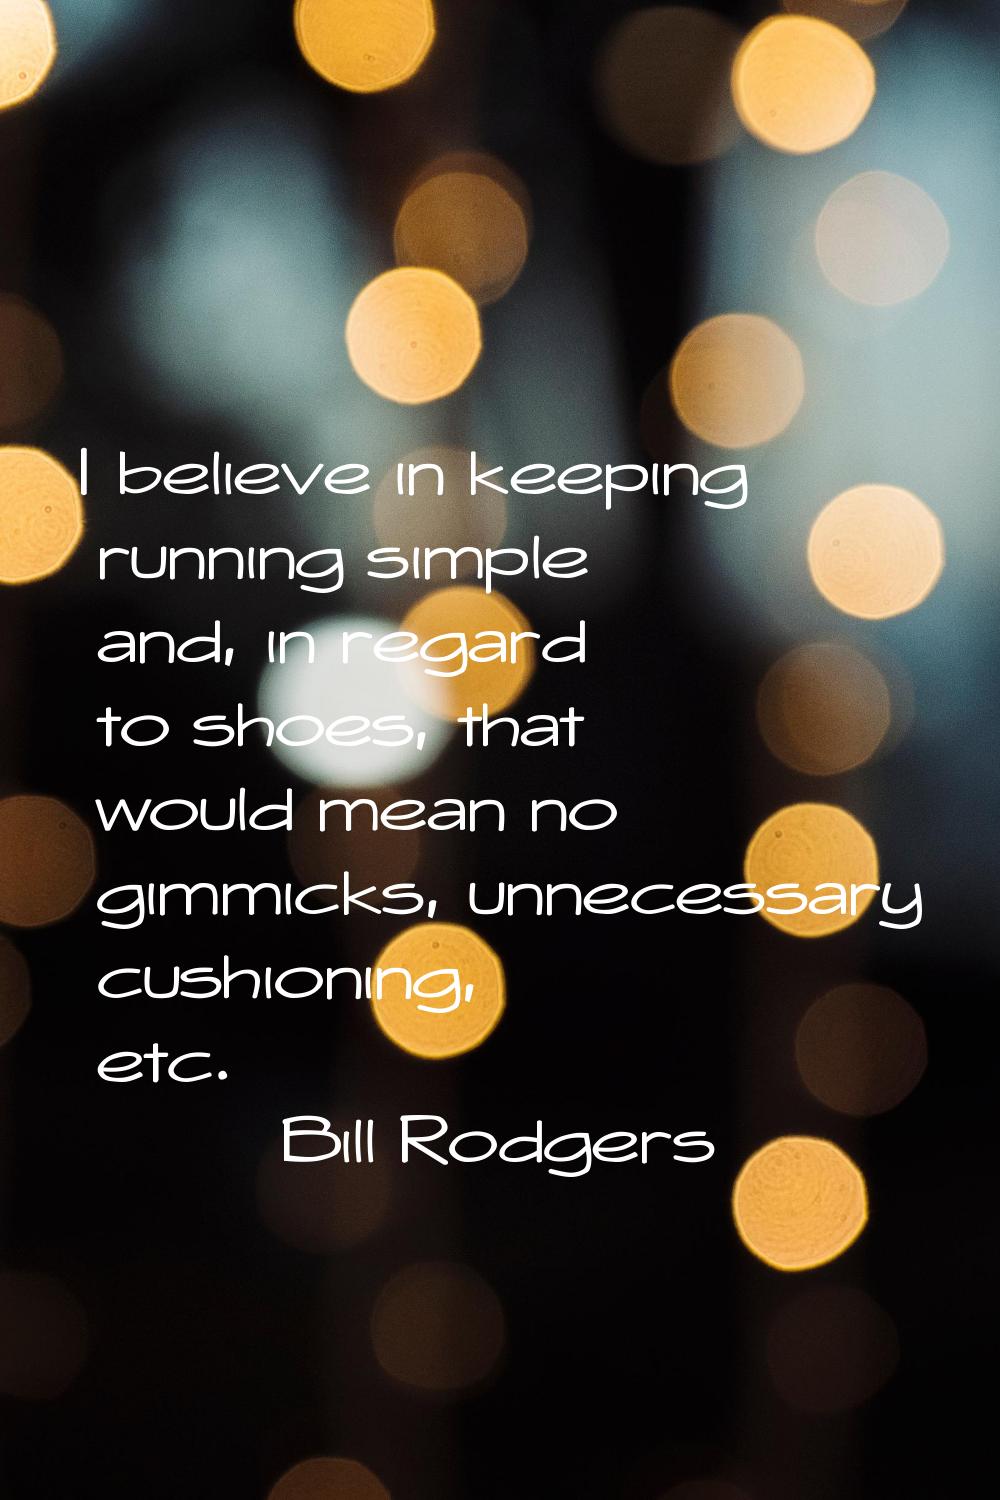 I believe in keeping running simple and, in regard to shoes, that would mean no gimmicks, unnecessa